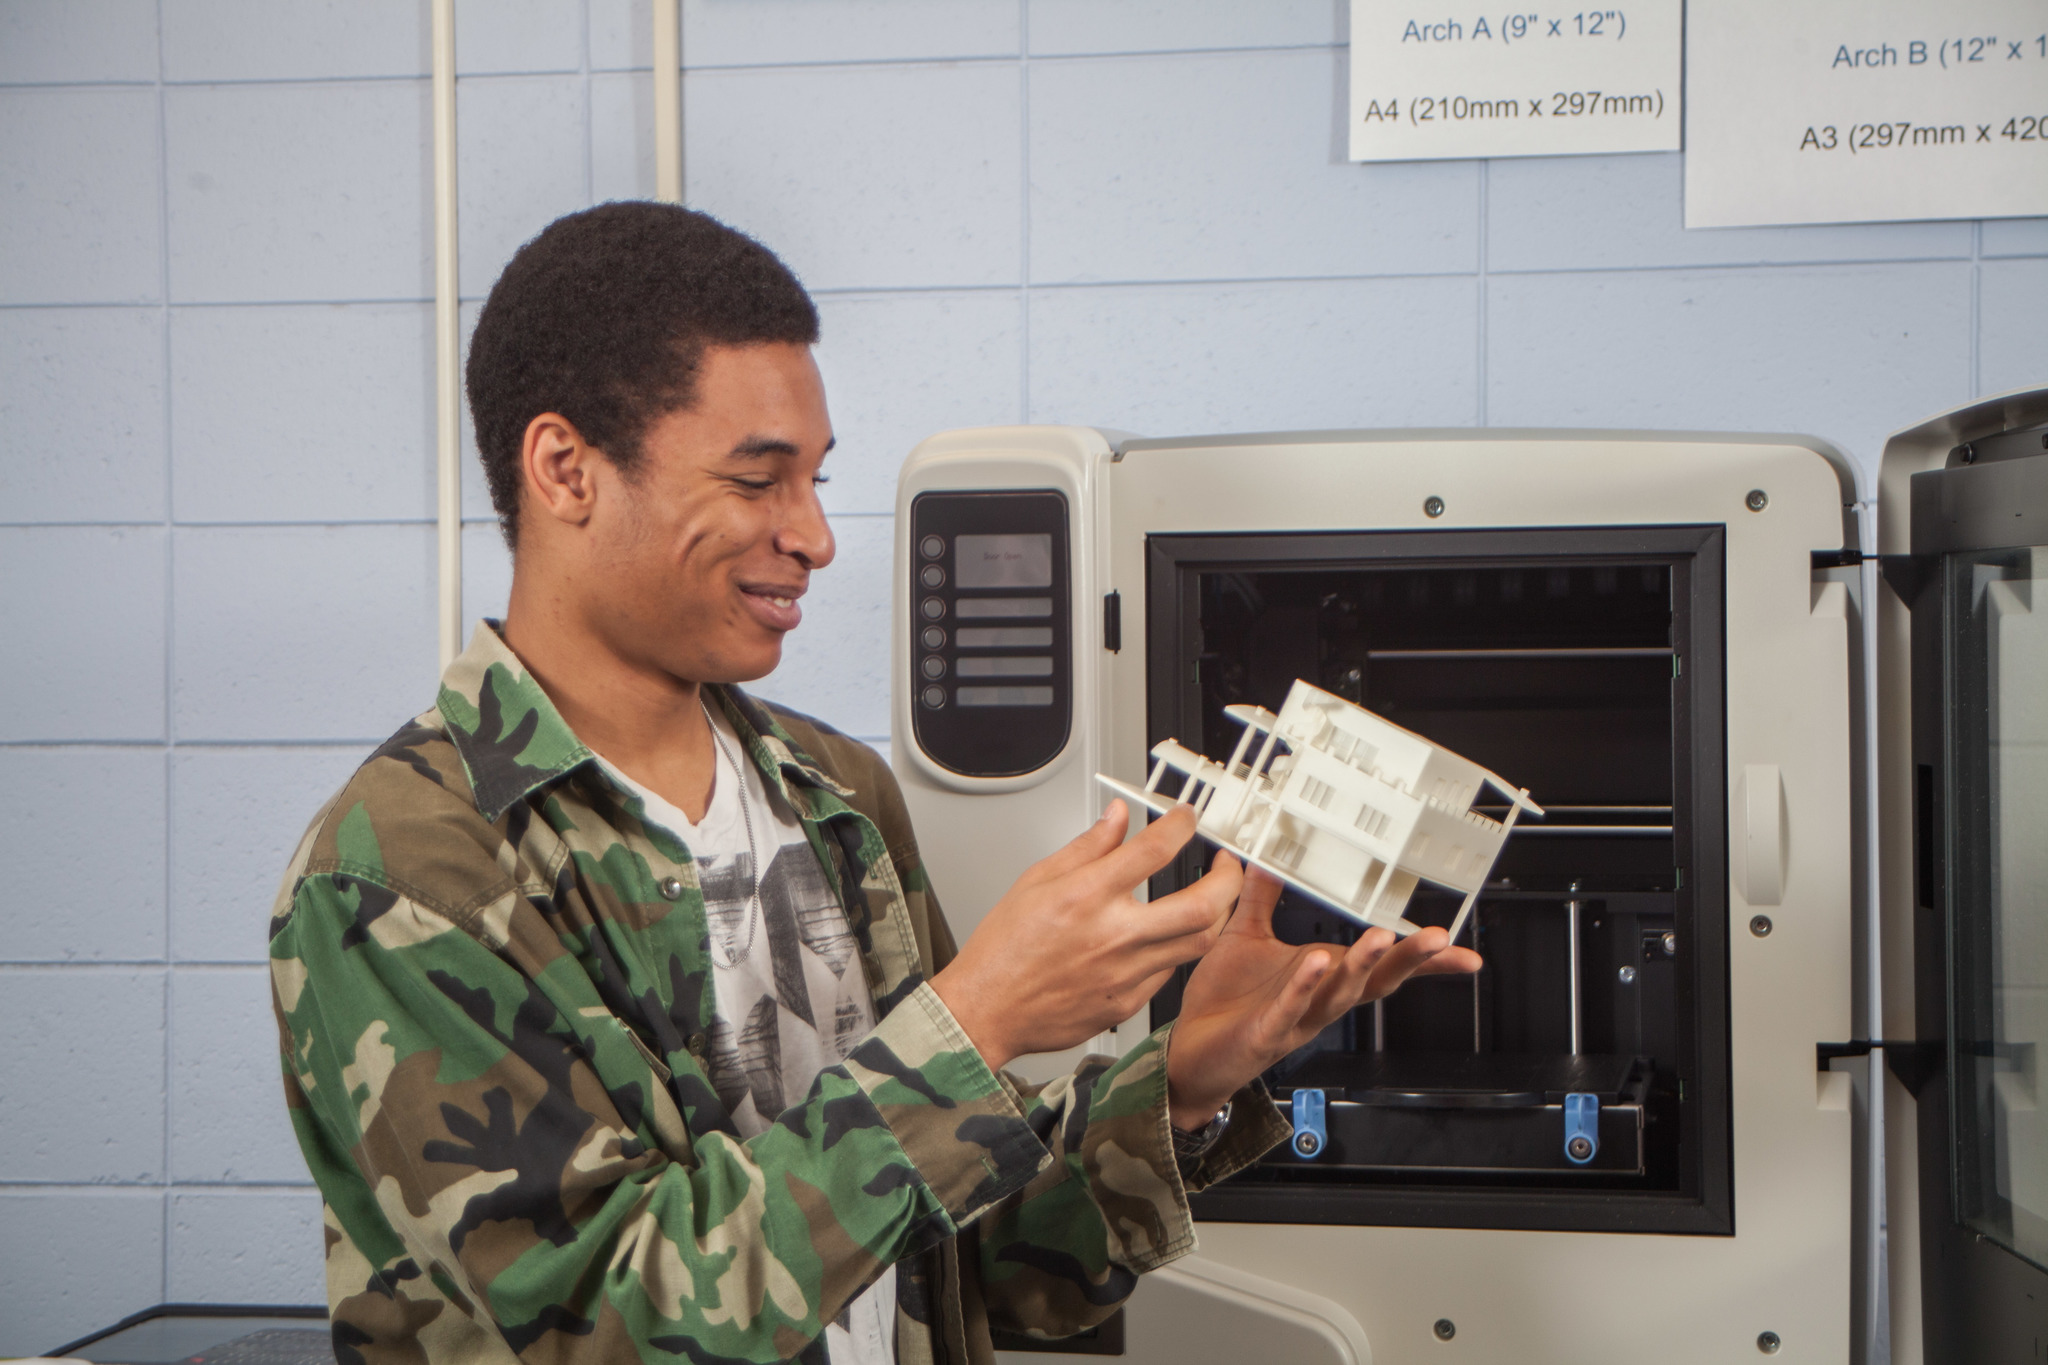 A male student is taking a white ABS plastic part out of a 3D printer. The part appears to be a house.